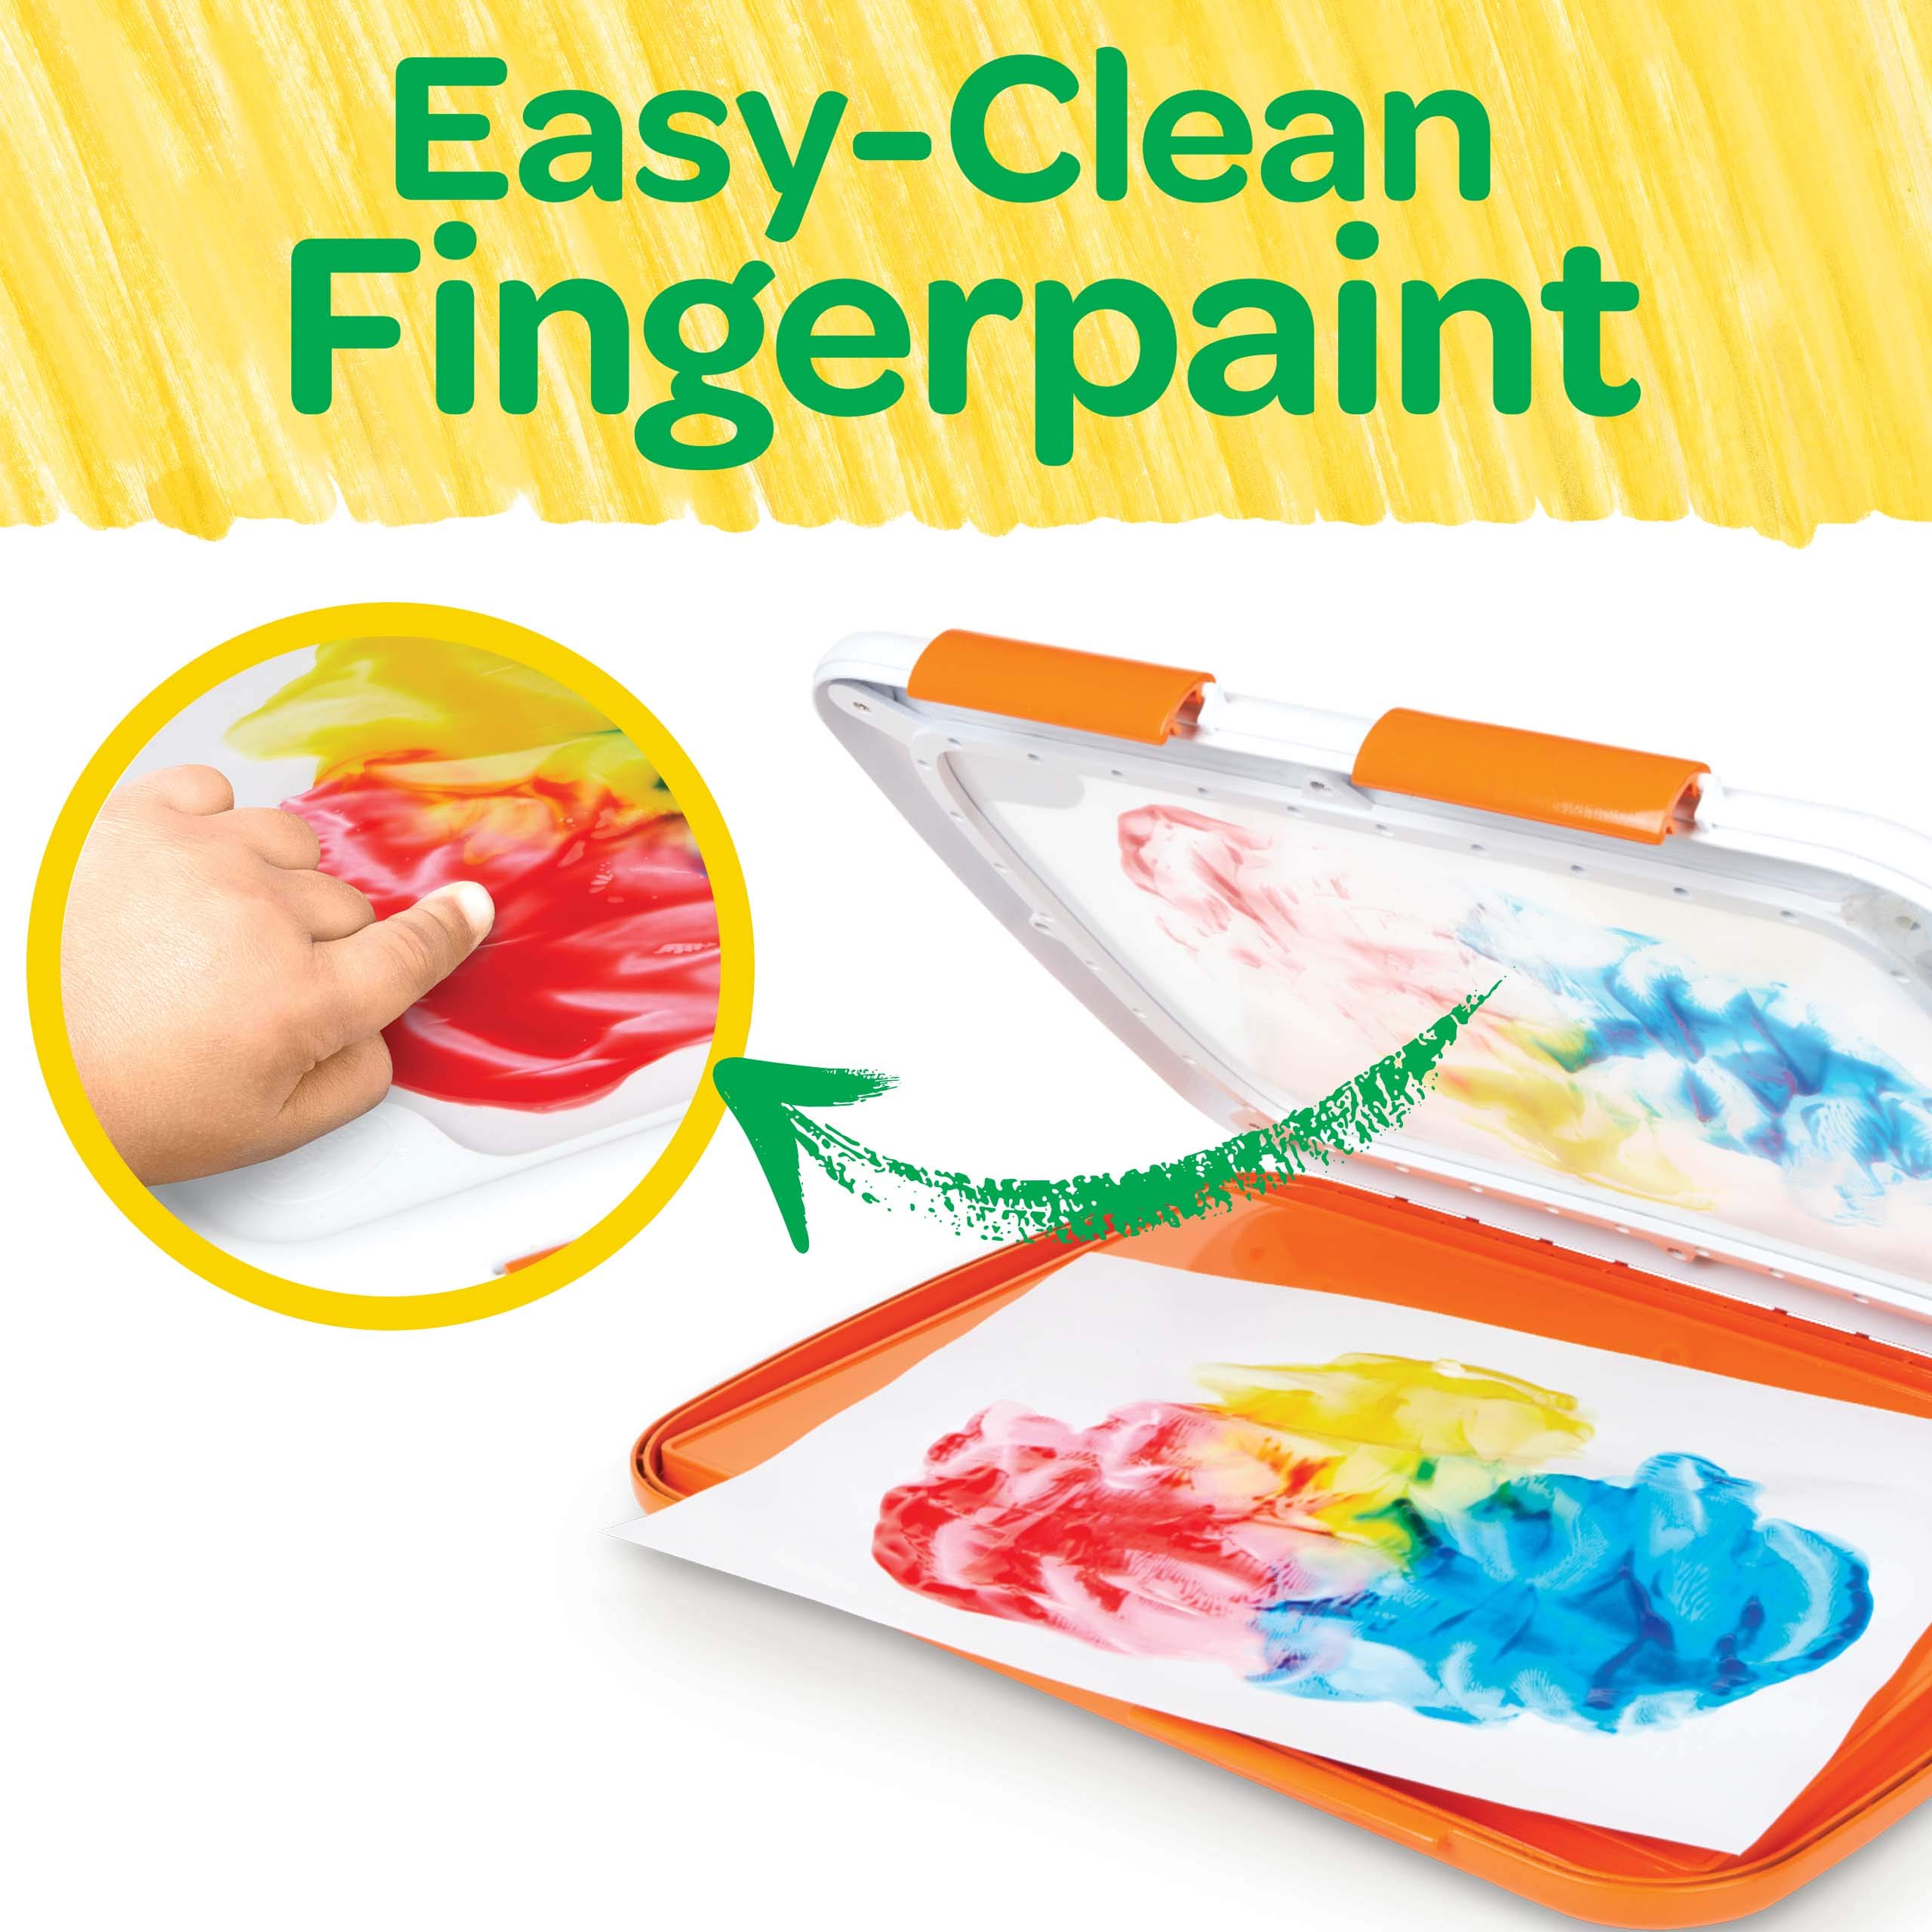 Crayola Washable Finger Paint Station, Less Mess Finger Paints for Toddlers, Kids Gift